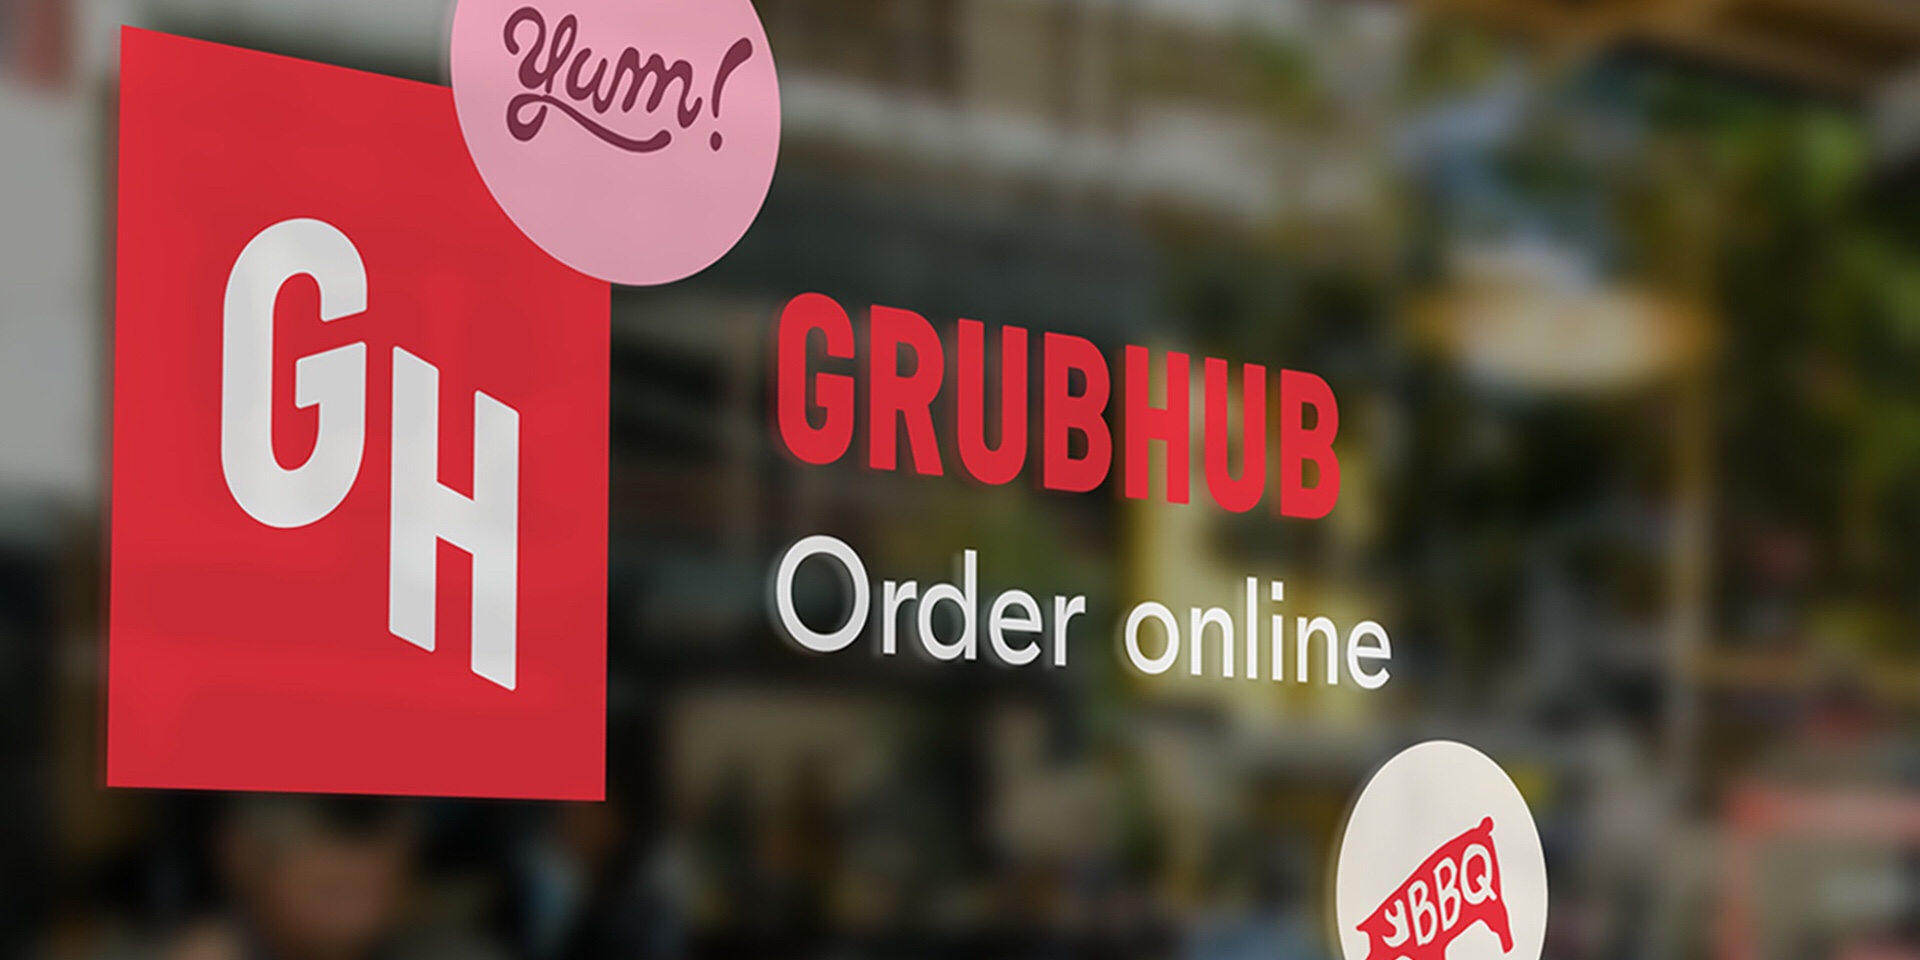 Yelp and GrubHub are now offering delivery from over 80,000 restaurants